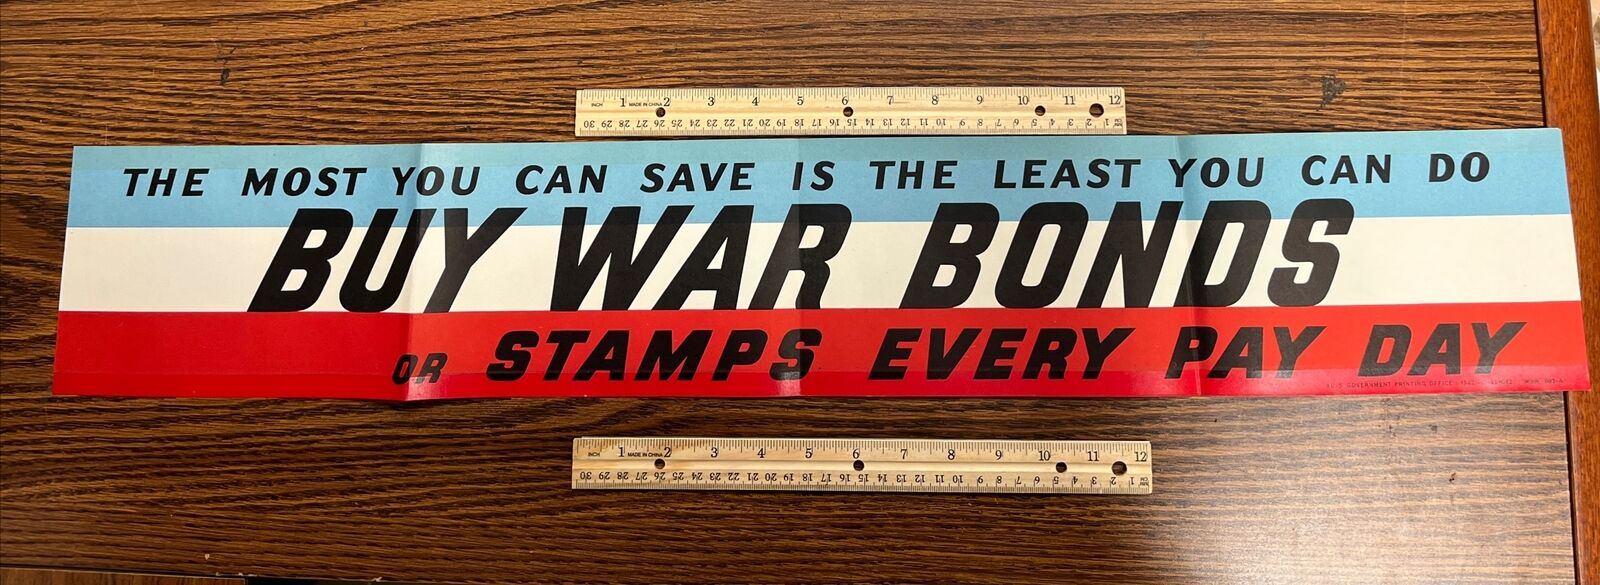 ORIGINAL 33 x 5.5” WWII 1942 Buy War Bonds or Stamps Every Pay Day Banner Poster